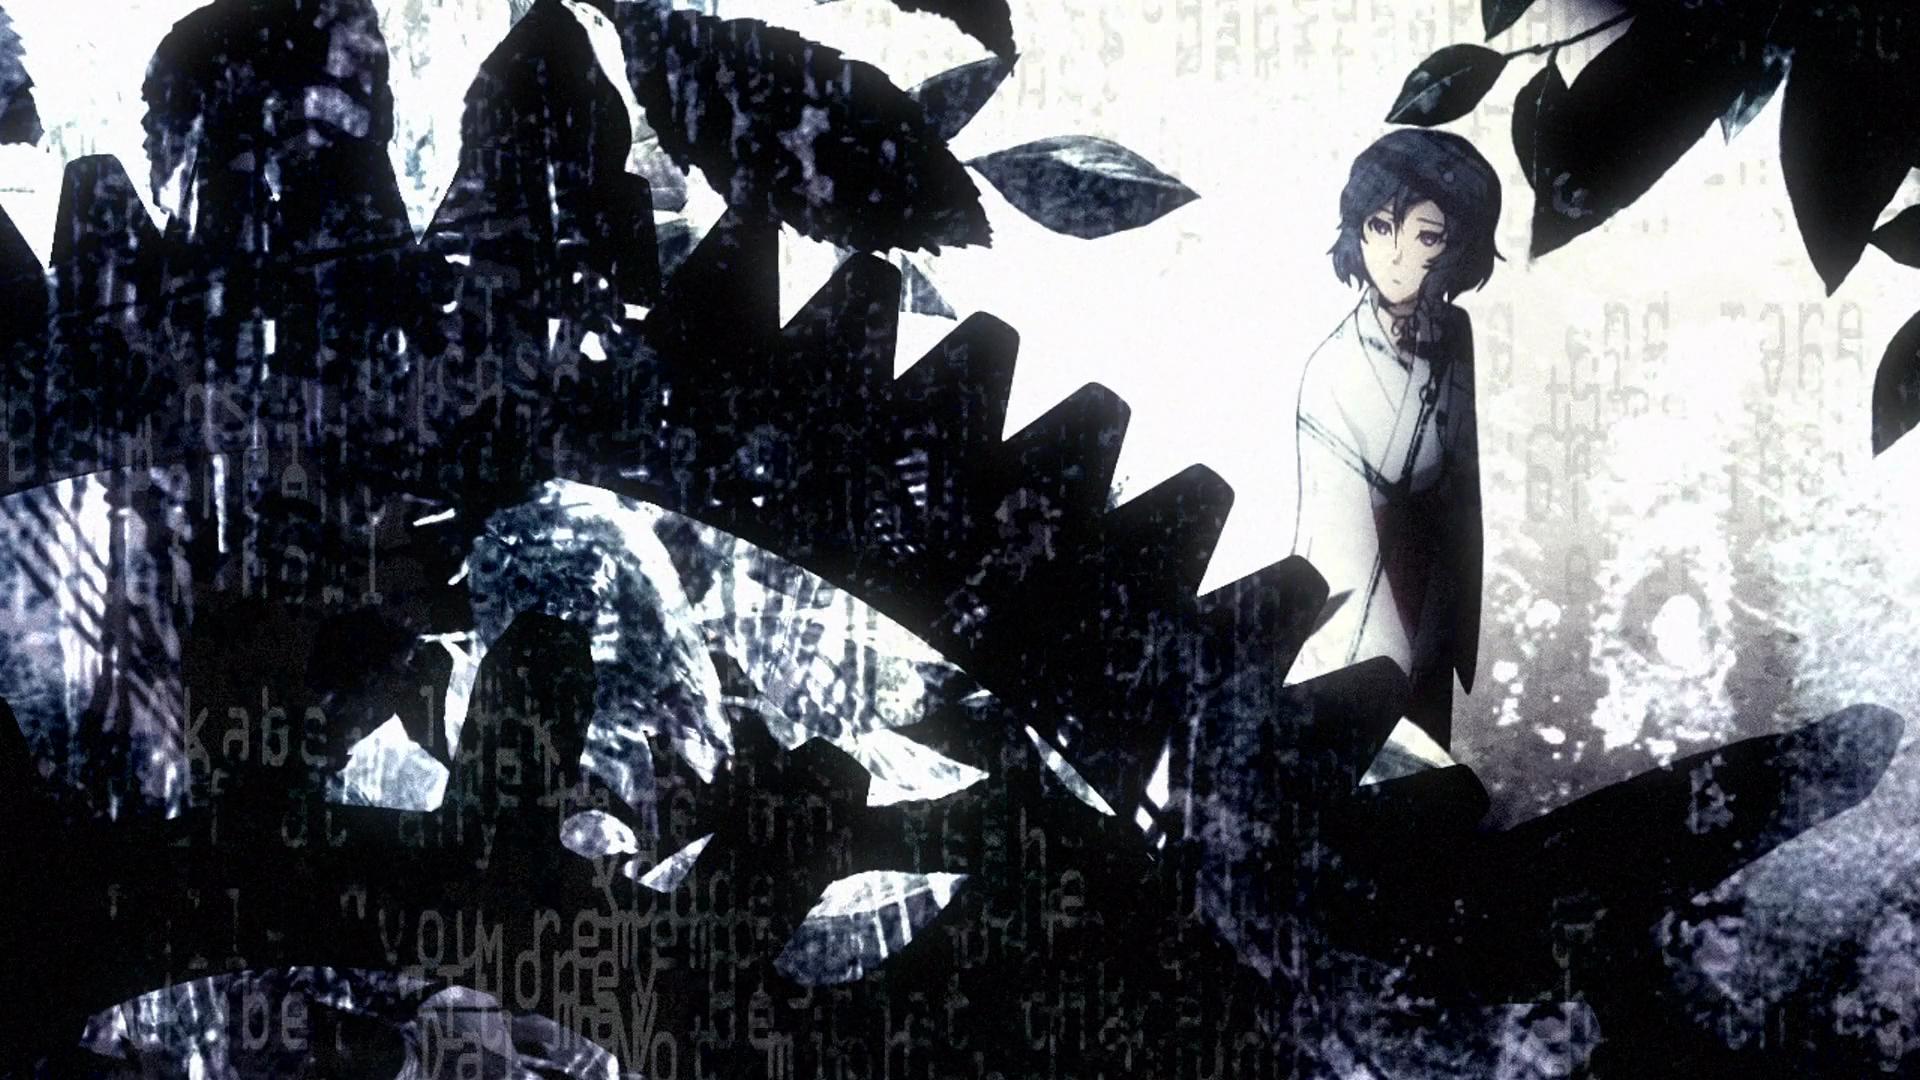 Steins;Gate Full HD Wallpaper and Background Image ...